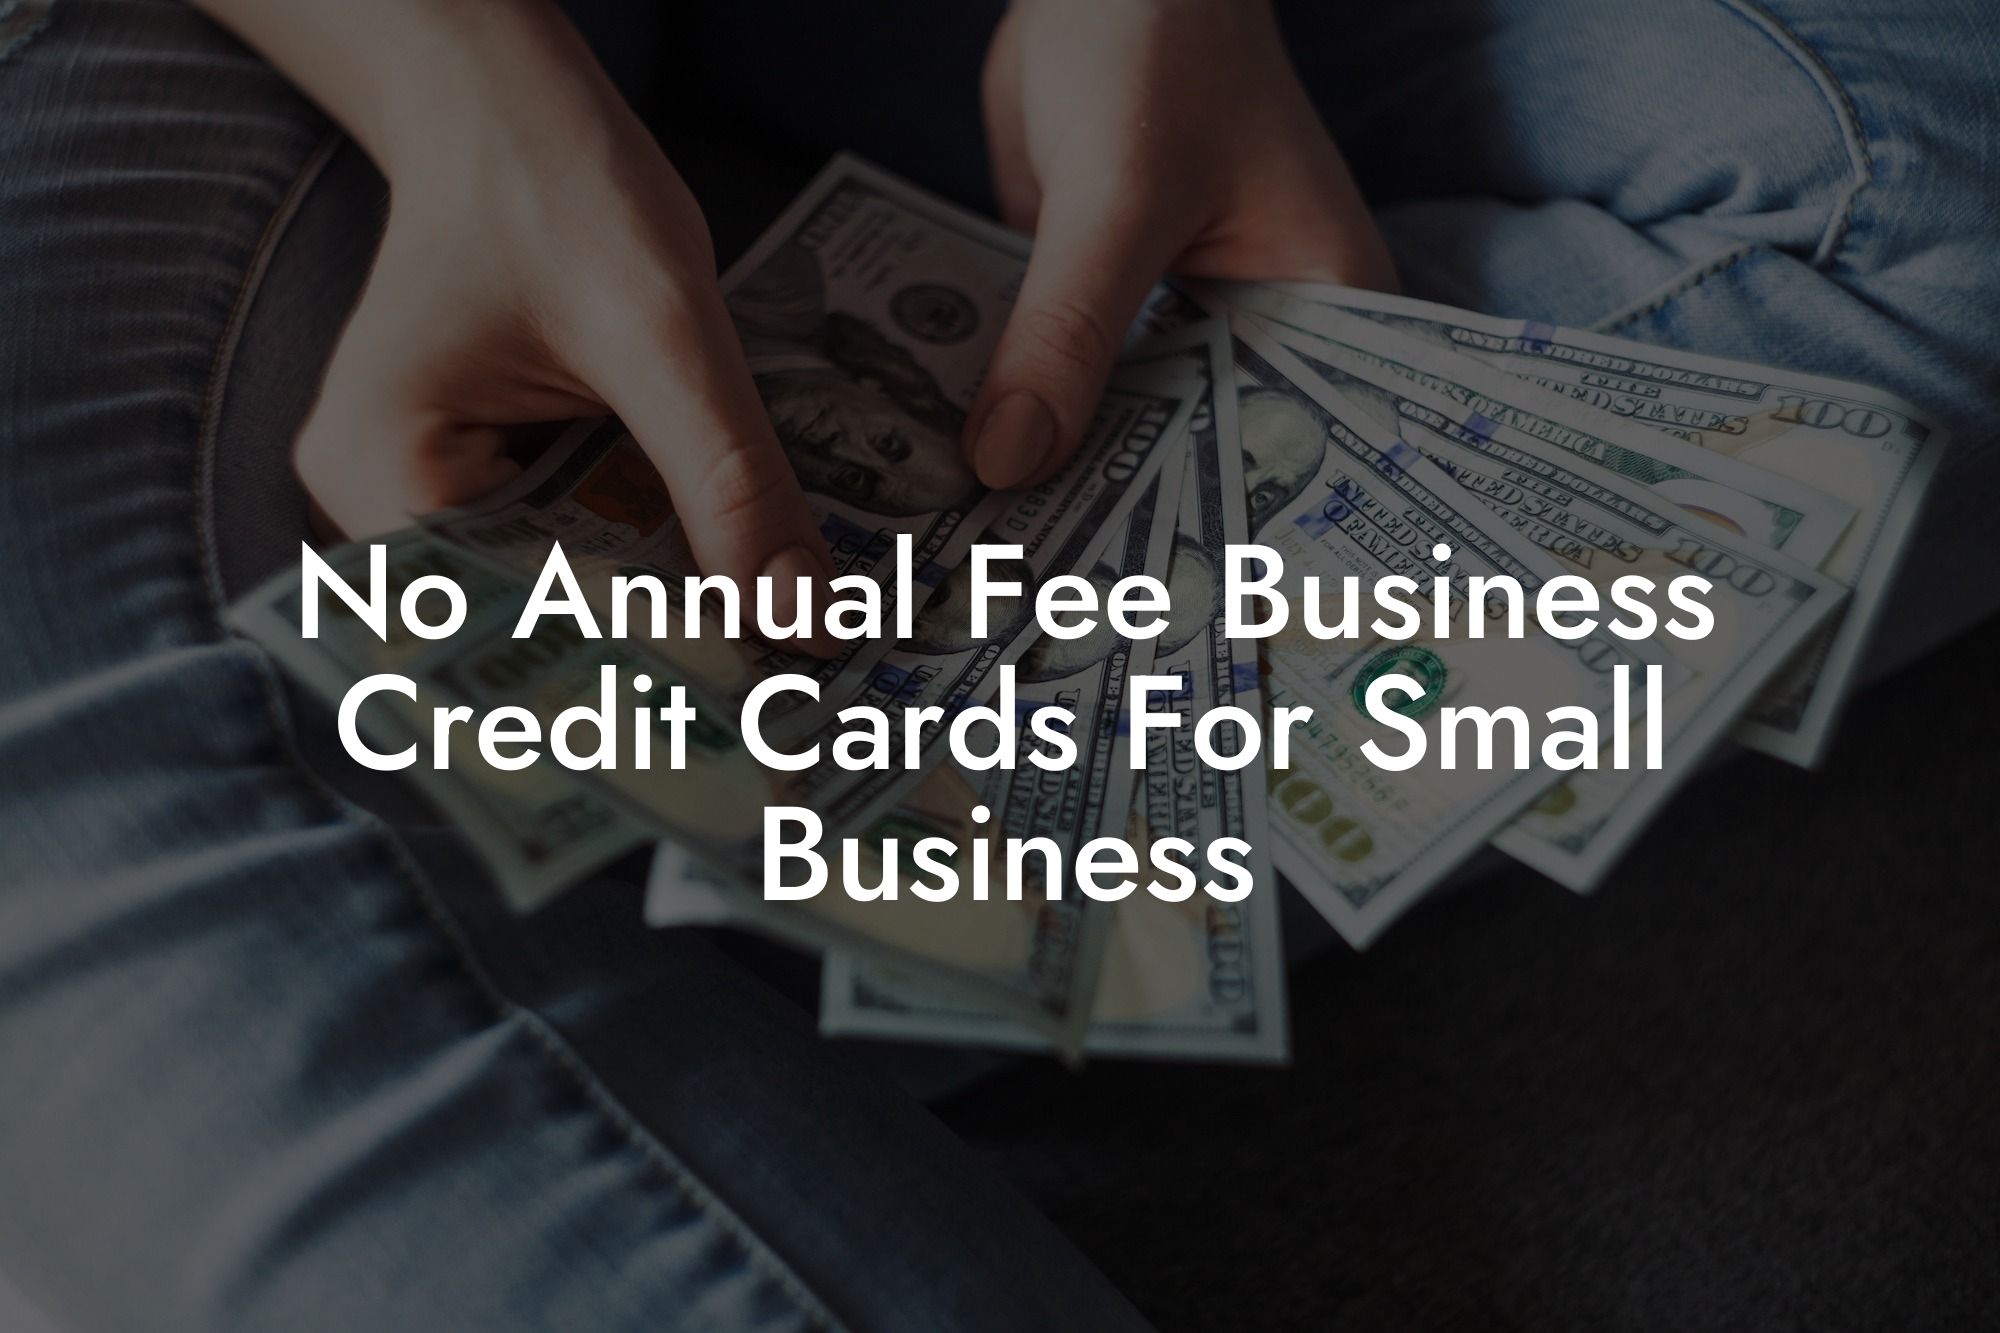 No Annual Fee Business Credit Cards For Small Business